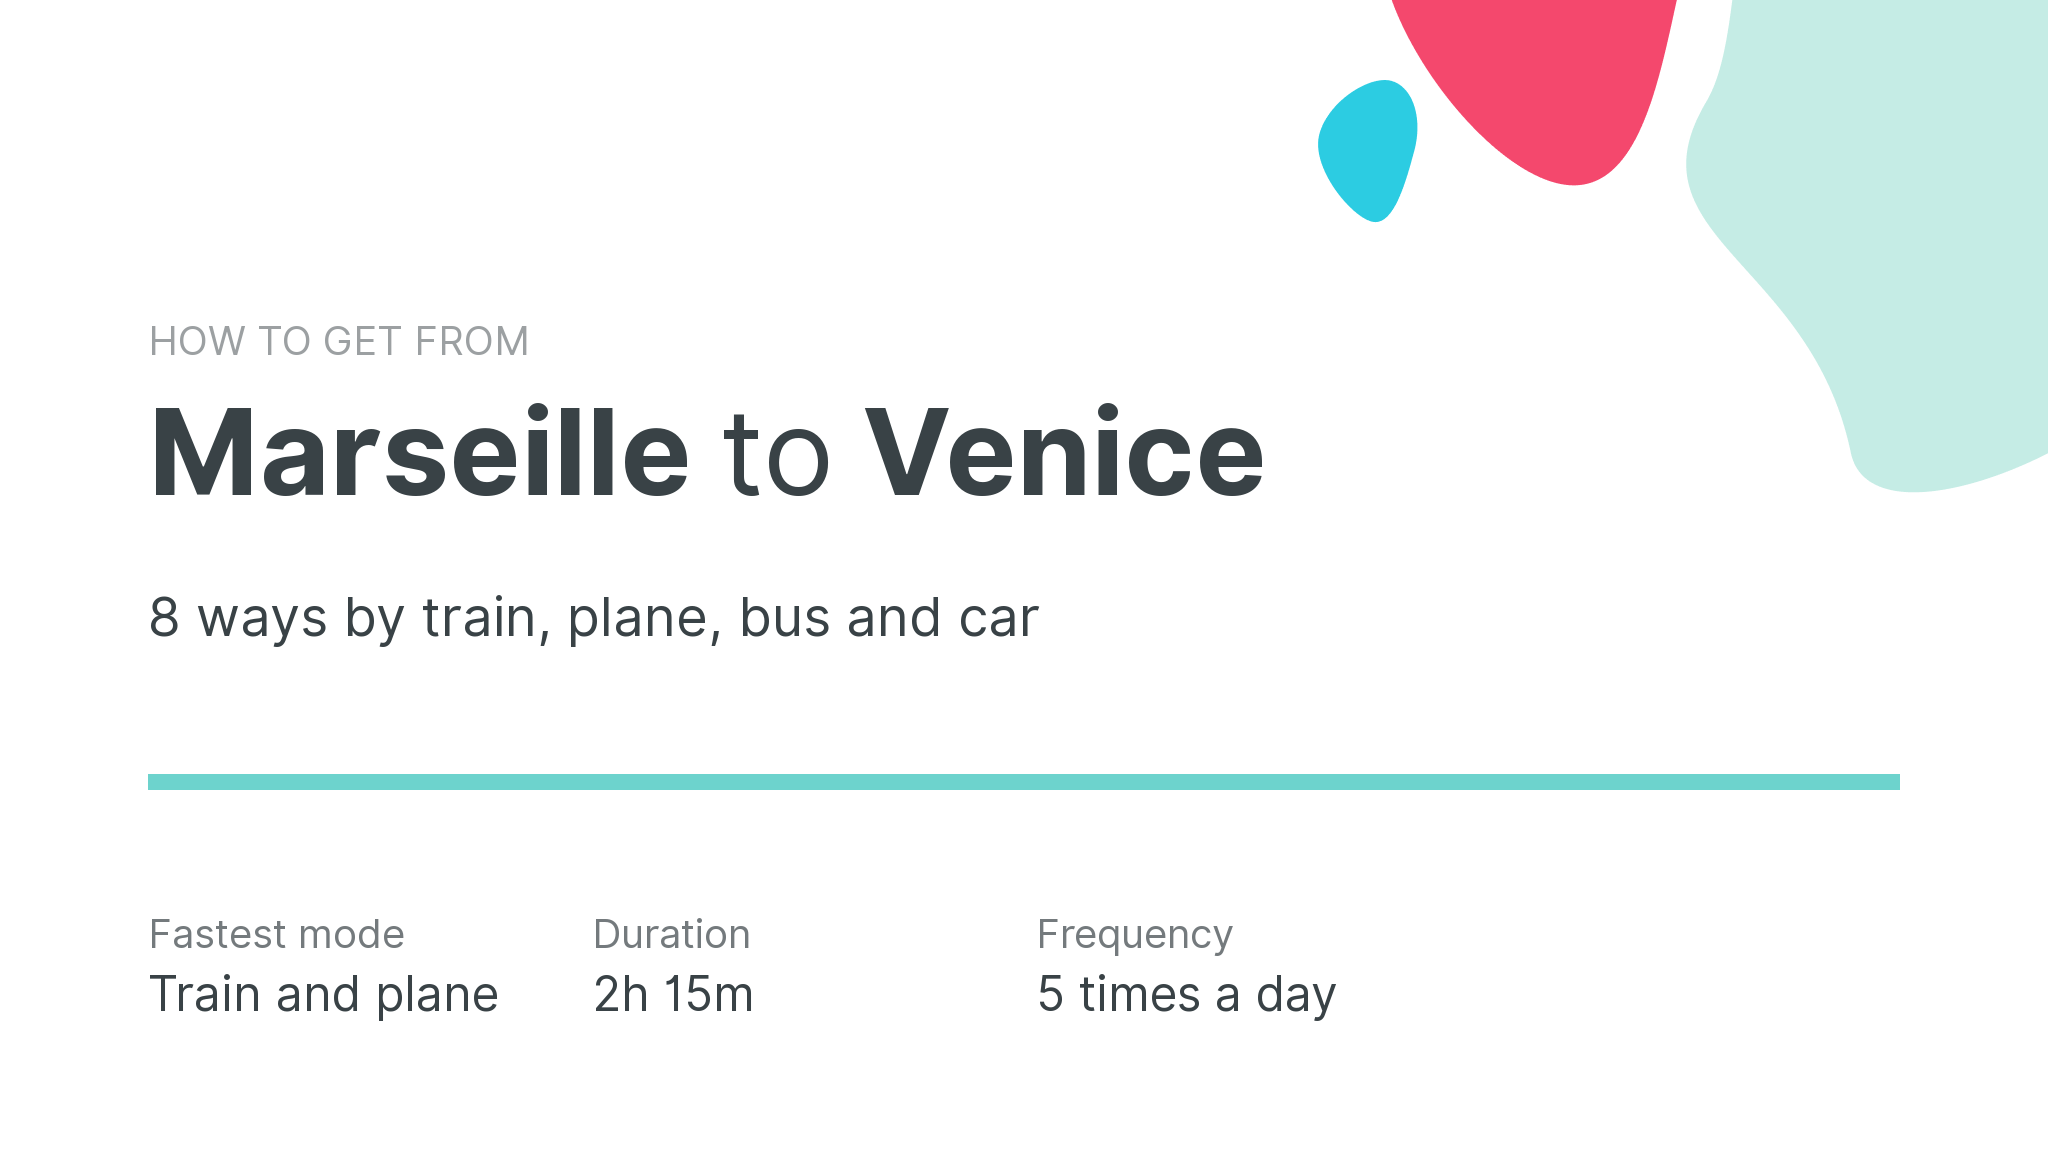 How do I get from Marseille to Venice